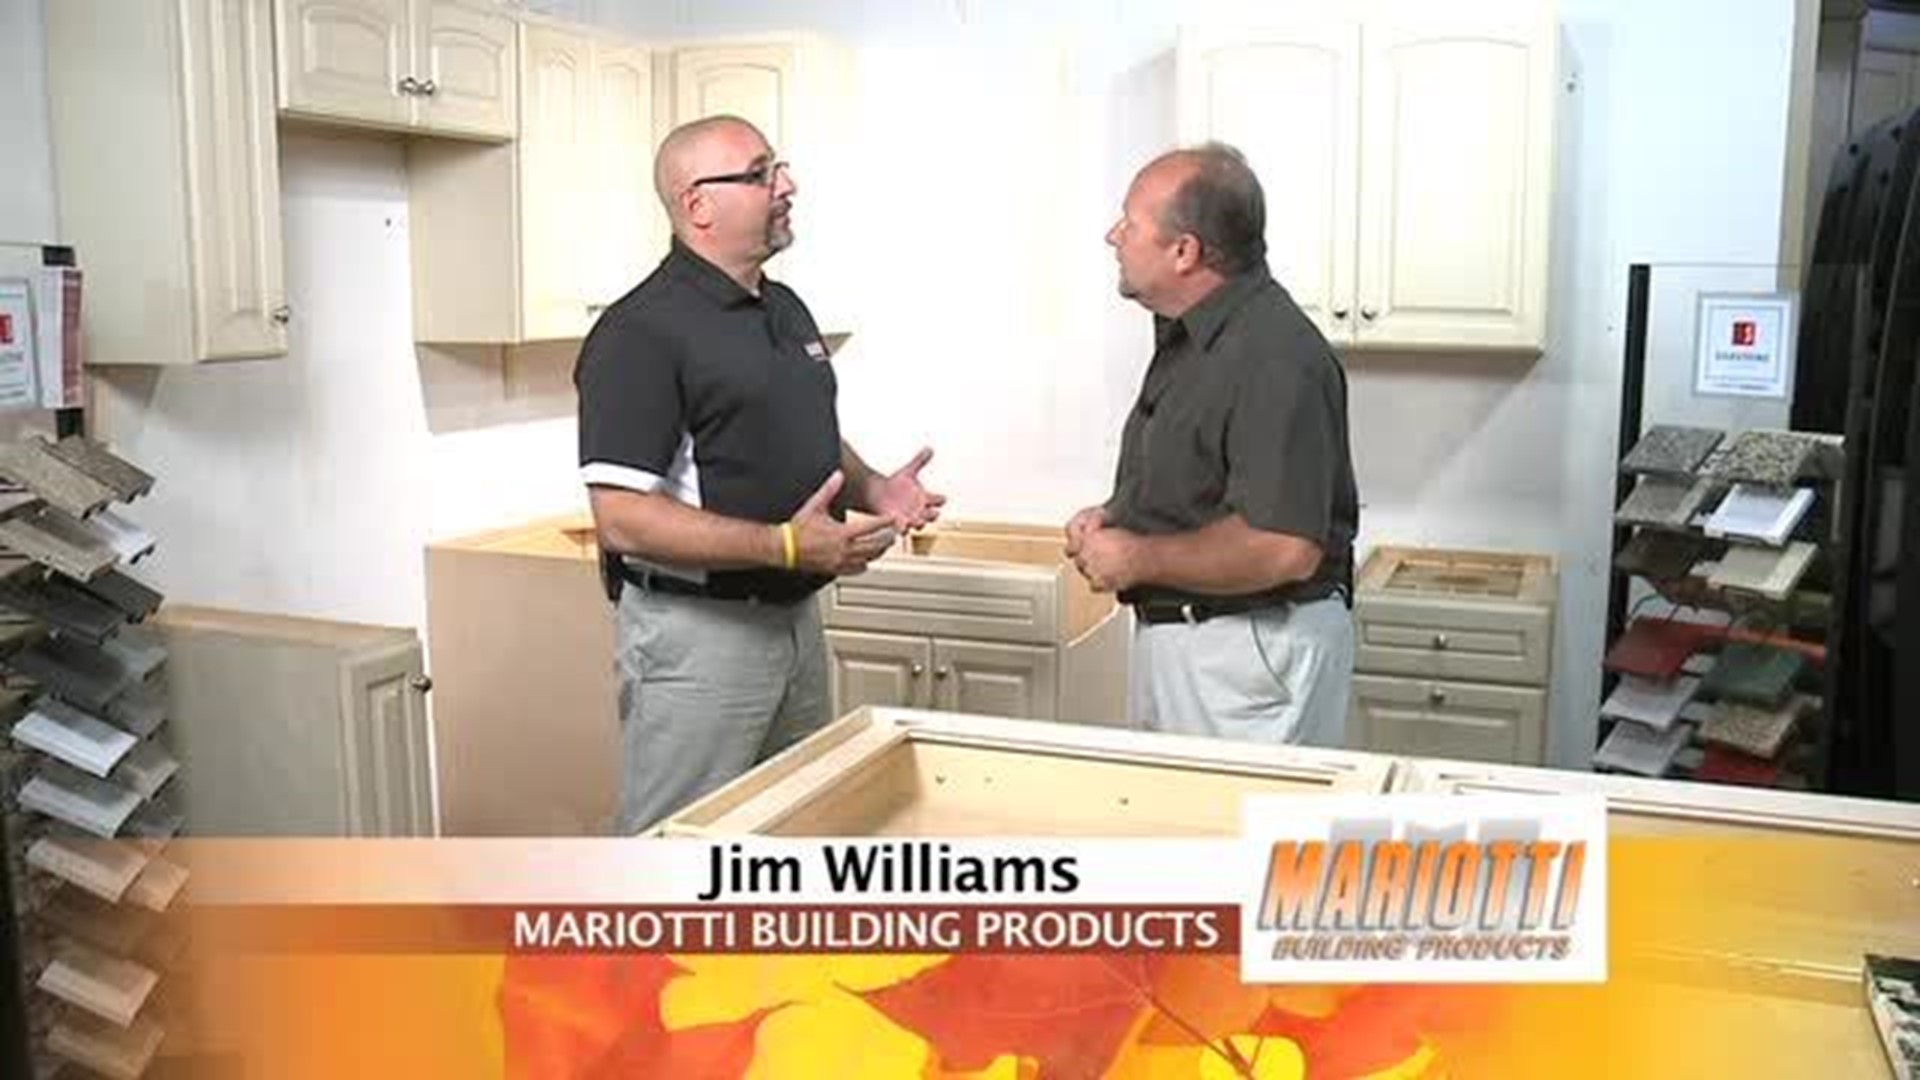 Fall Show - Mariotti Building Products